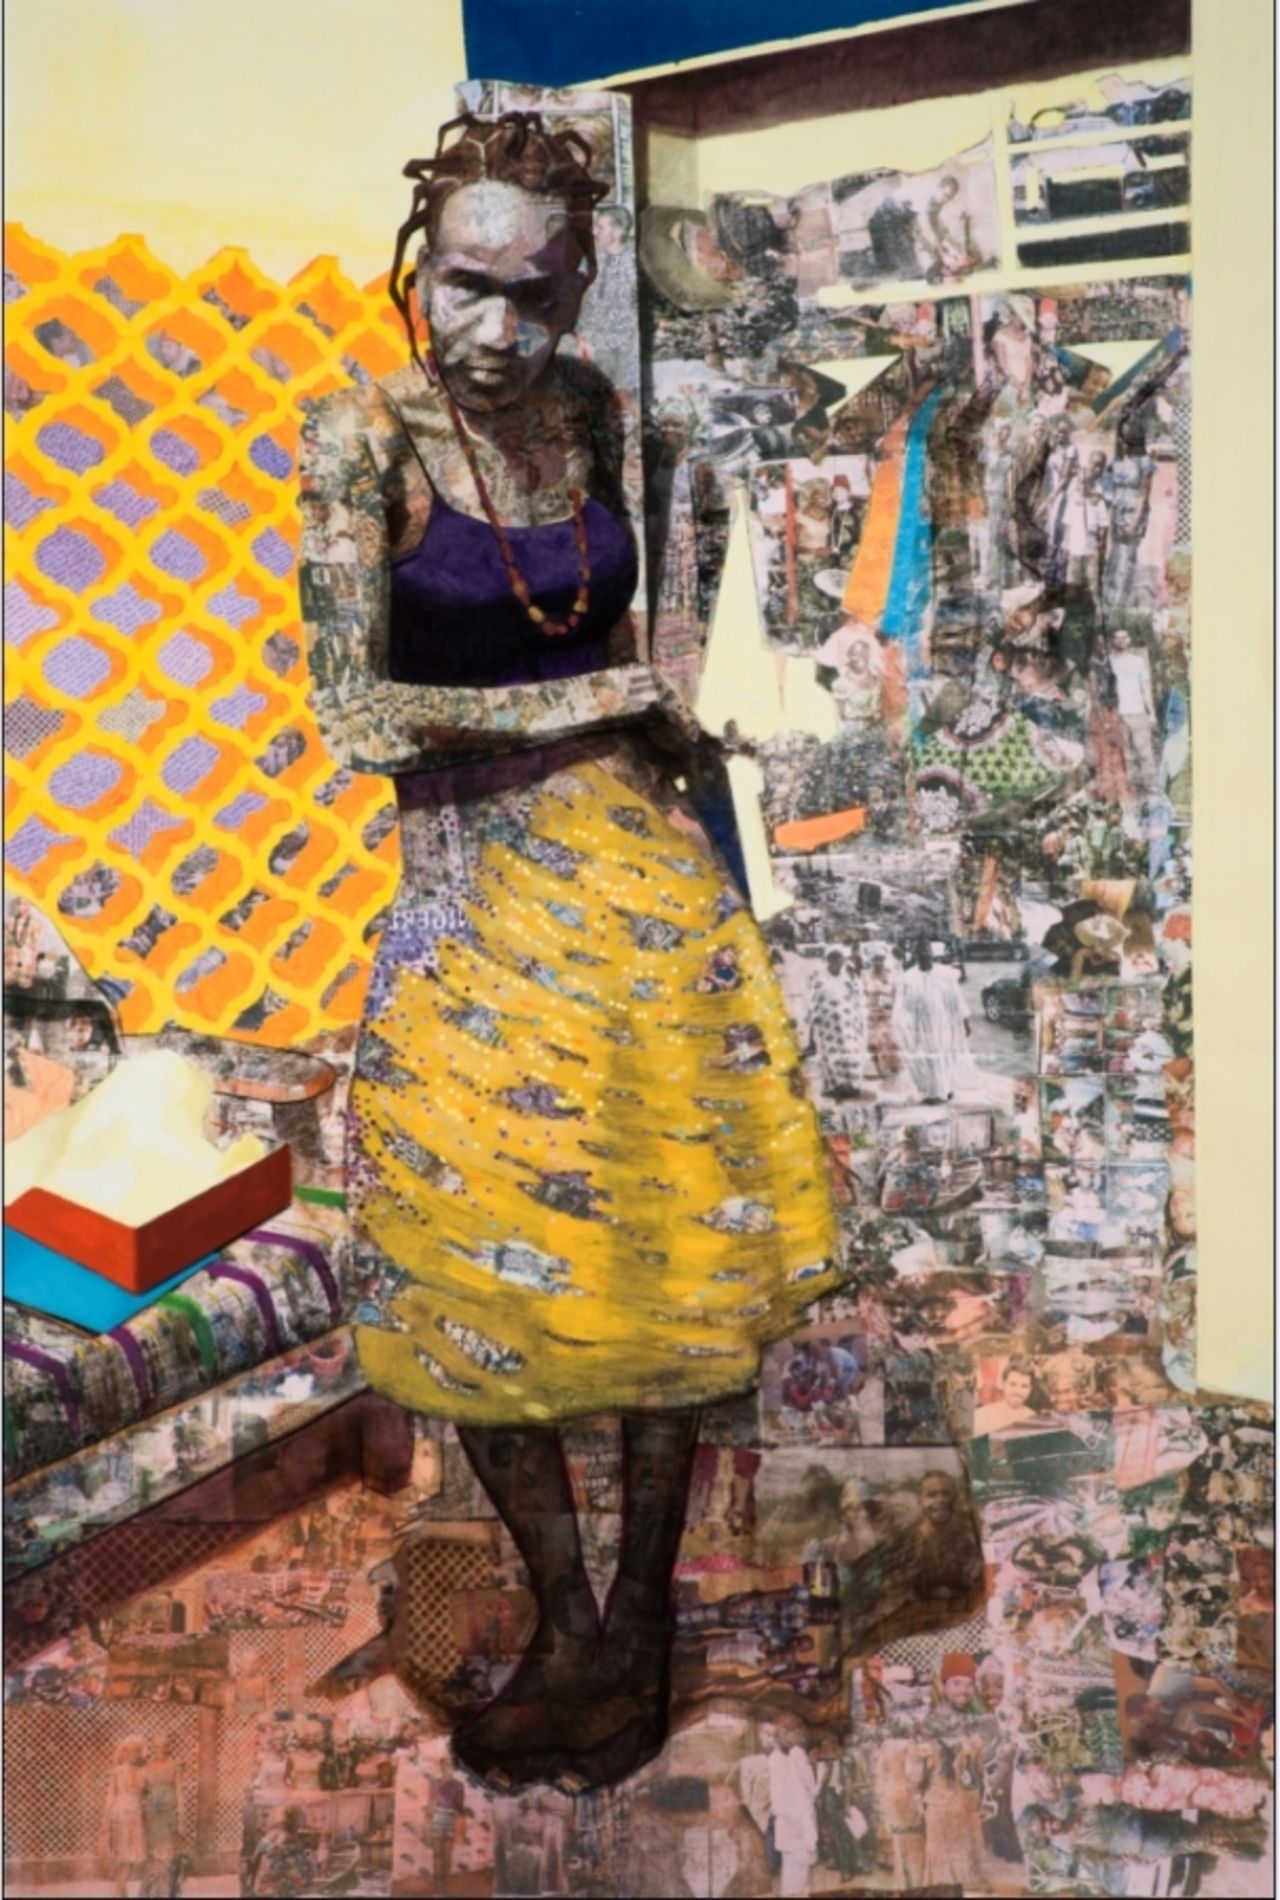 Like most of Akunyili's works, this 2011 piece is on paper using a combination of paint, charcoal, pastel, colored pencil, collage and photocopy transfers.